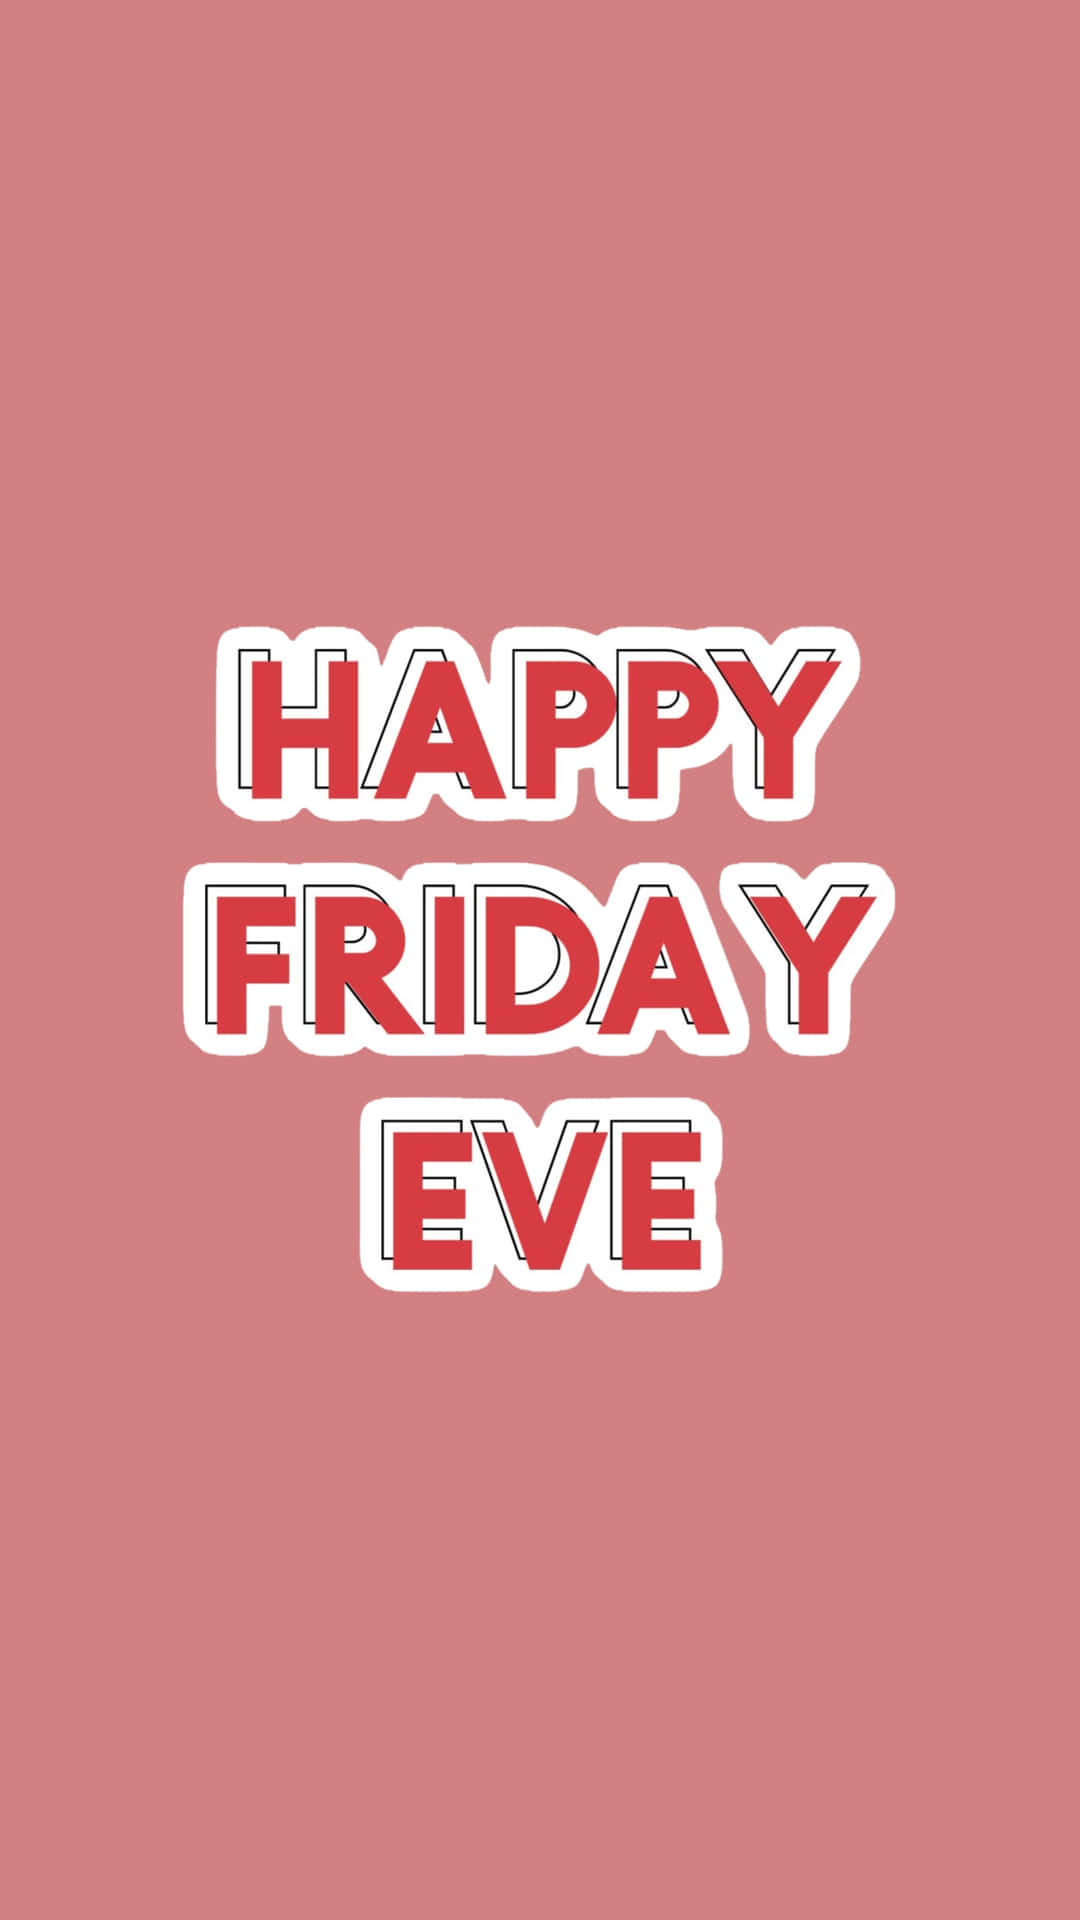 Happy Friday Eve Greeting Wallpaper